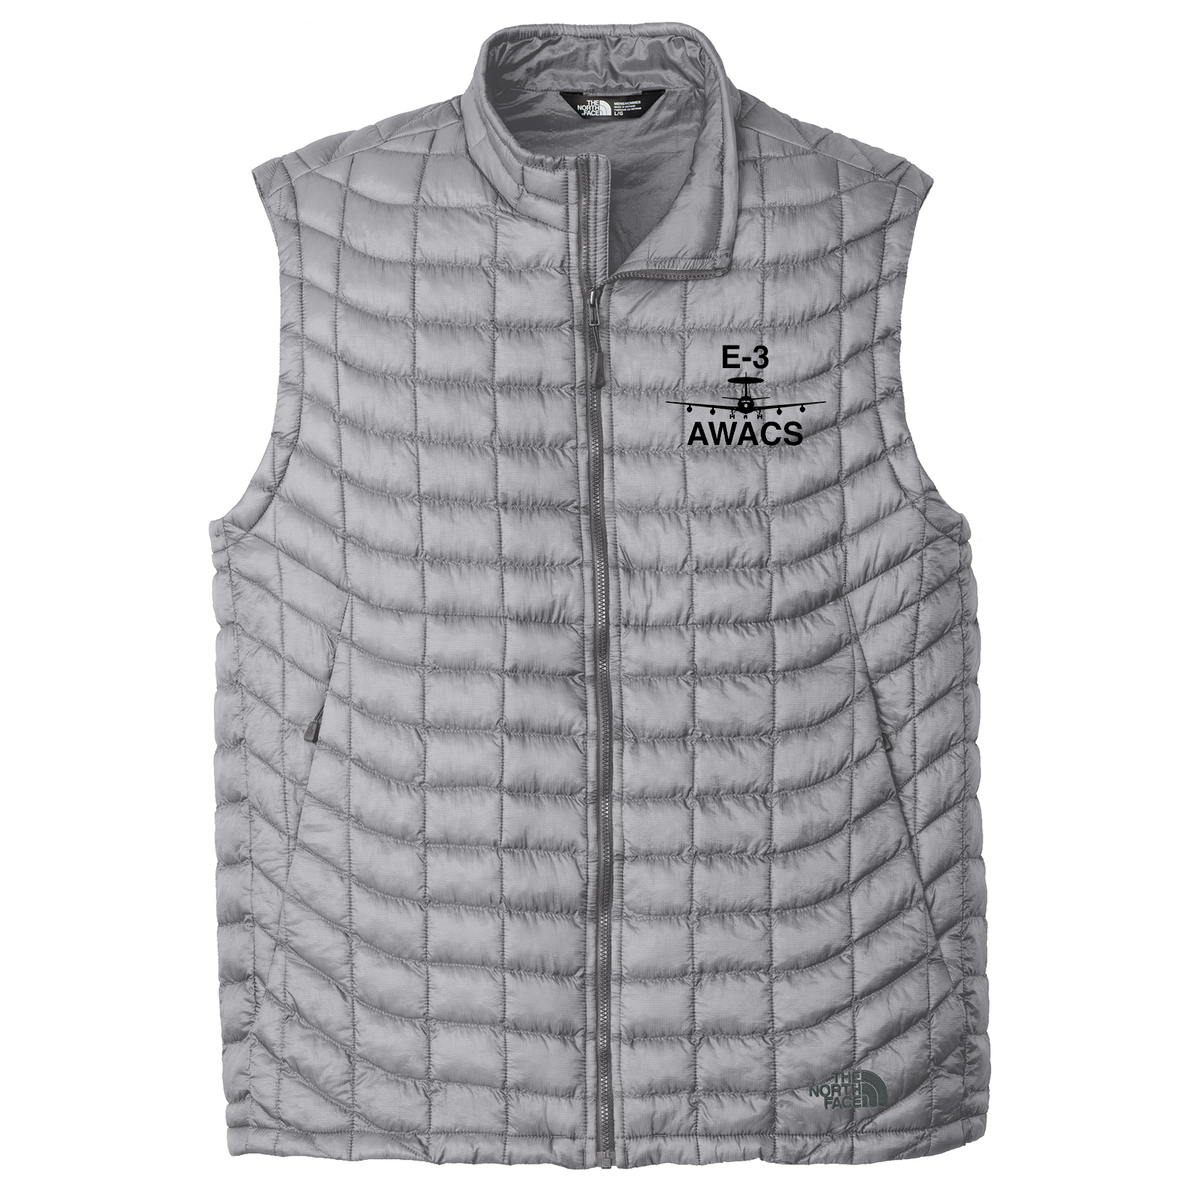 Boeing AWACS E-3 The North Face Thermoball Vest